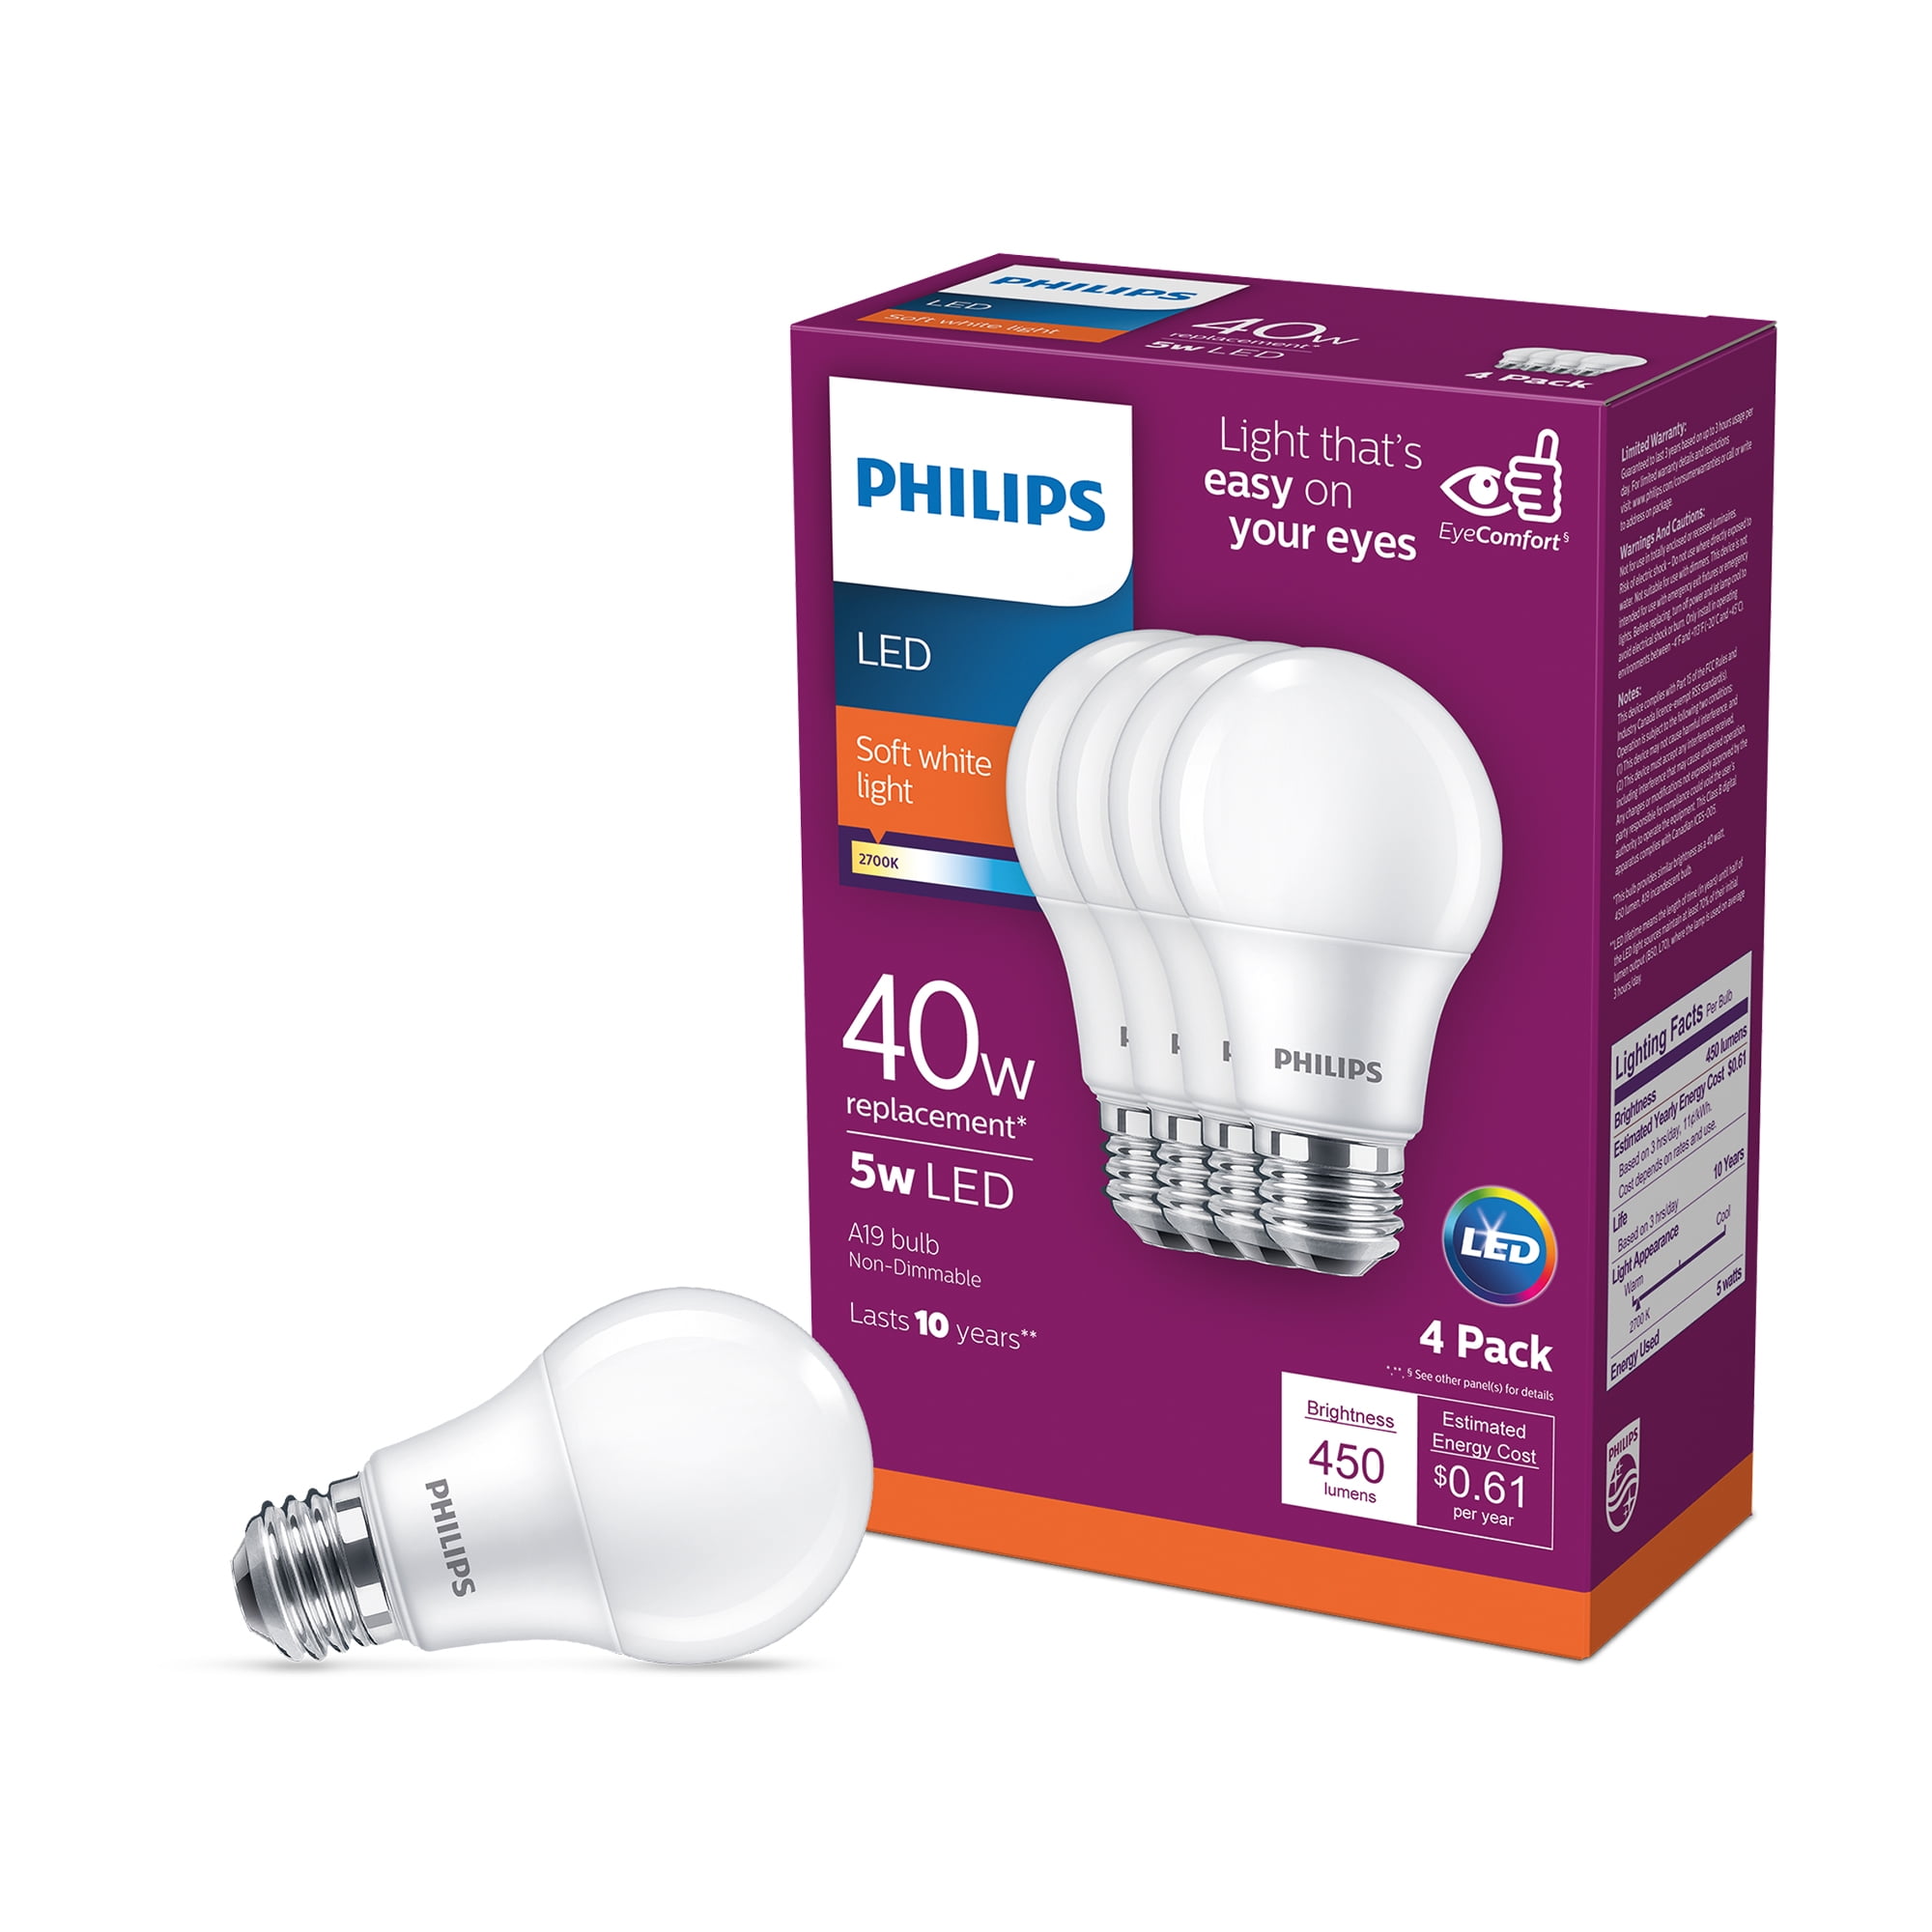 12 Pack Frosted Phillips- 40W- 120V- A19 Light Bulb 